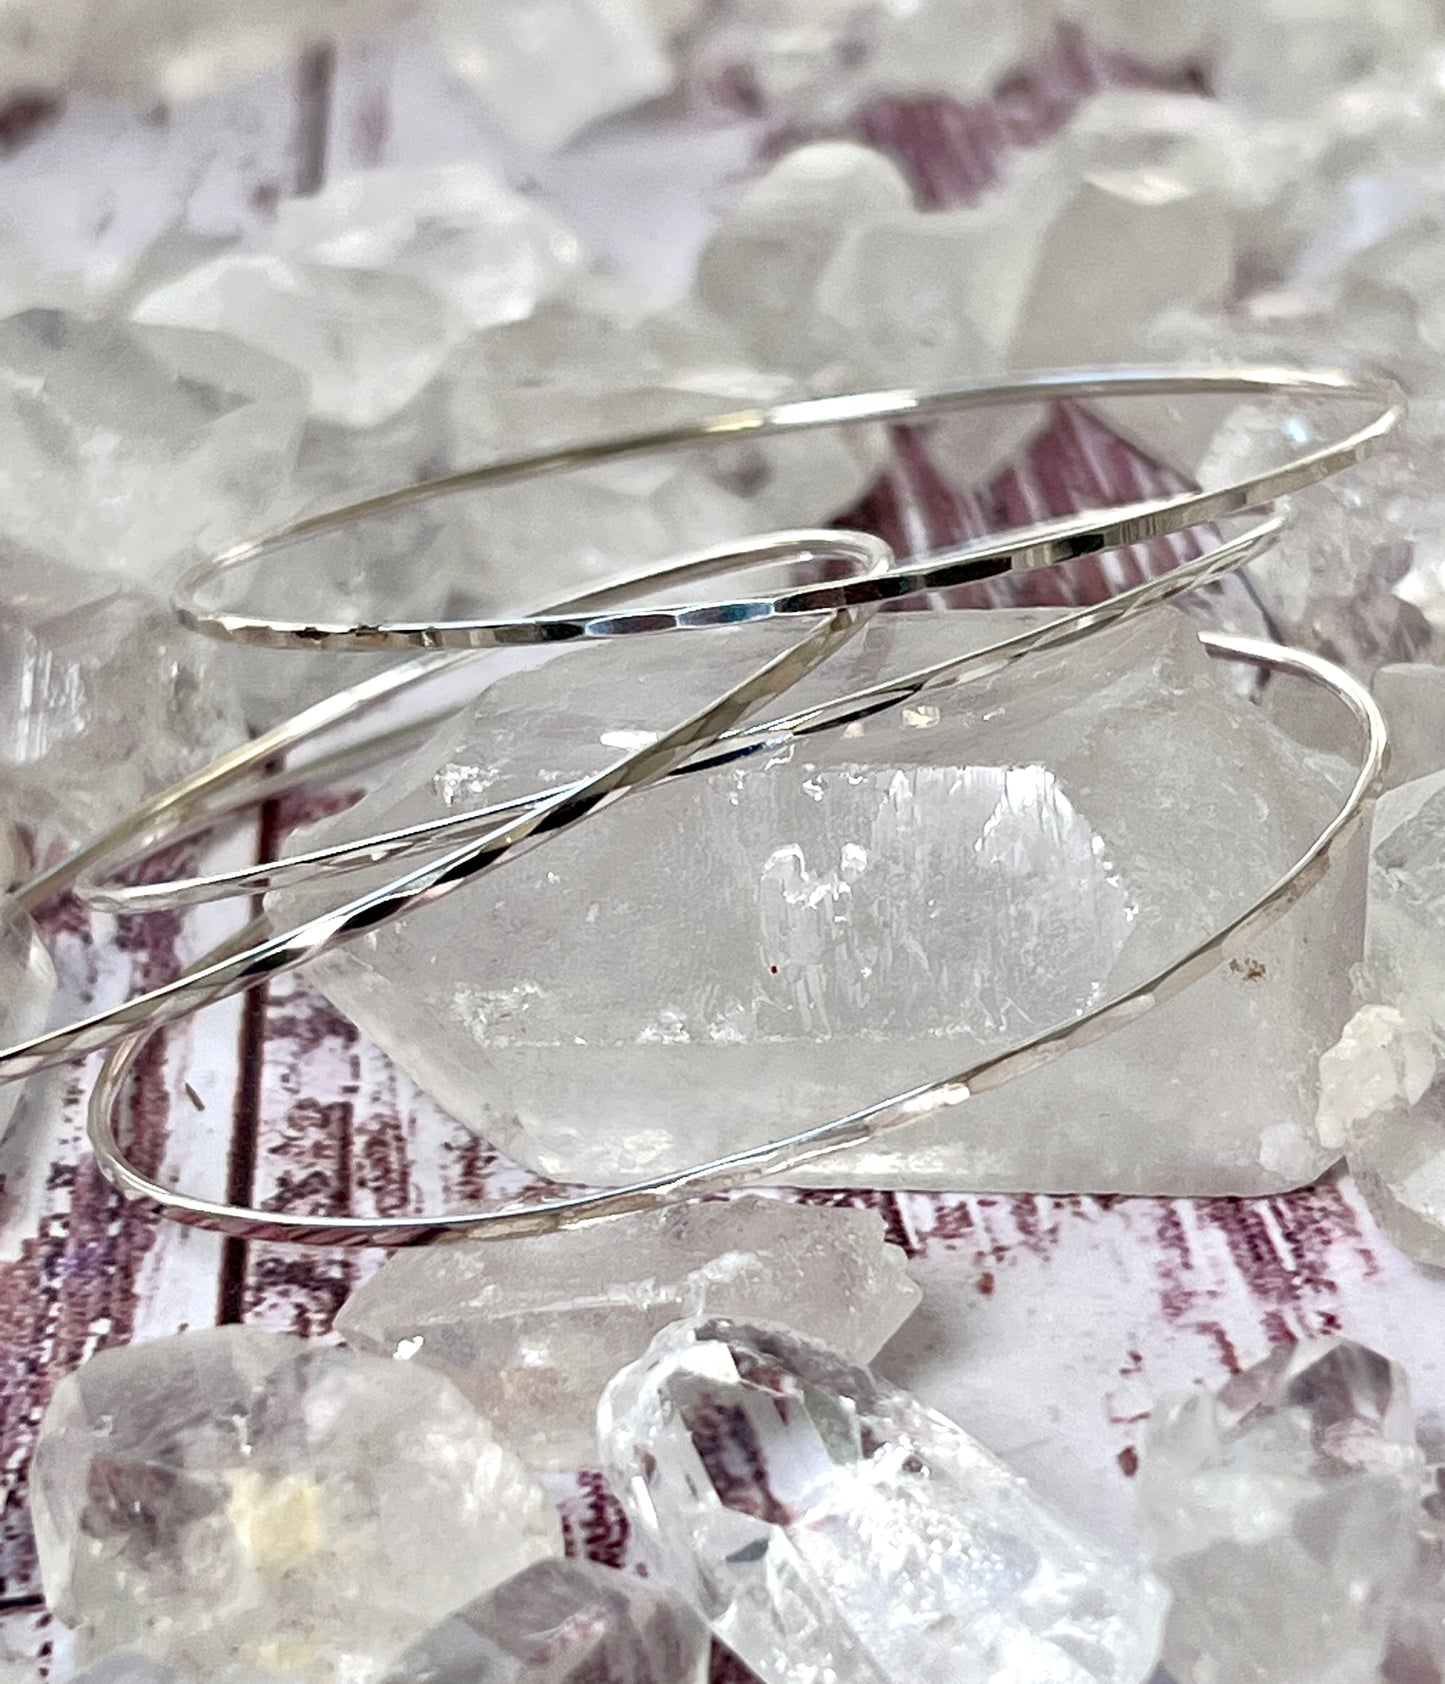 A stack of Super Silver Squared Faceted Bangle Bracelets on top of crystals, creating a stunning display of unique facets.